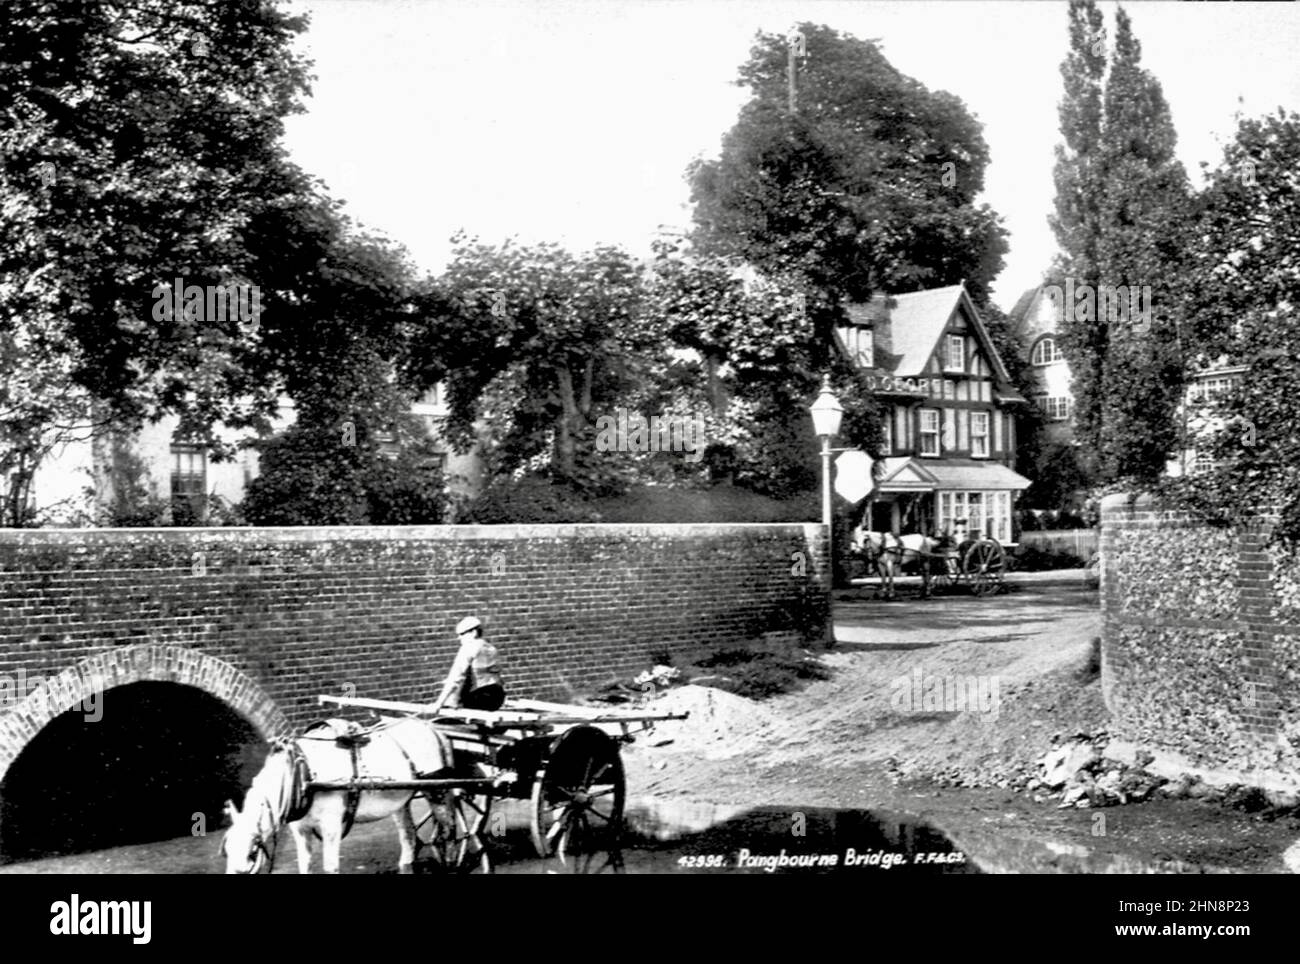 The Bridge and the Old George, Pangbourne, Bekshire - Francis Frith Foto - 1899 Stockfoto